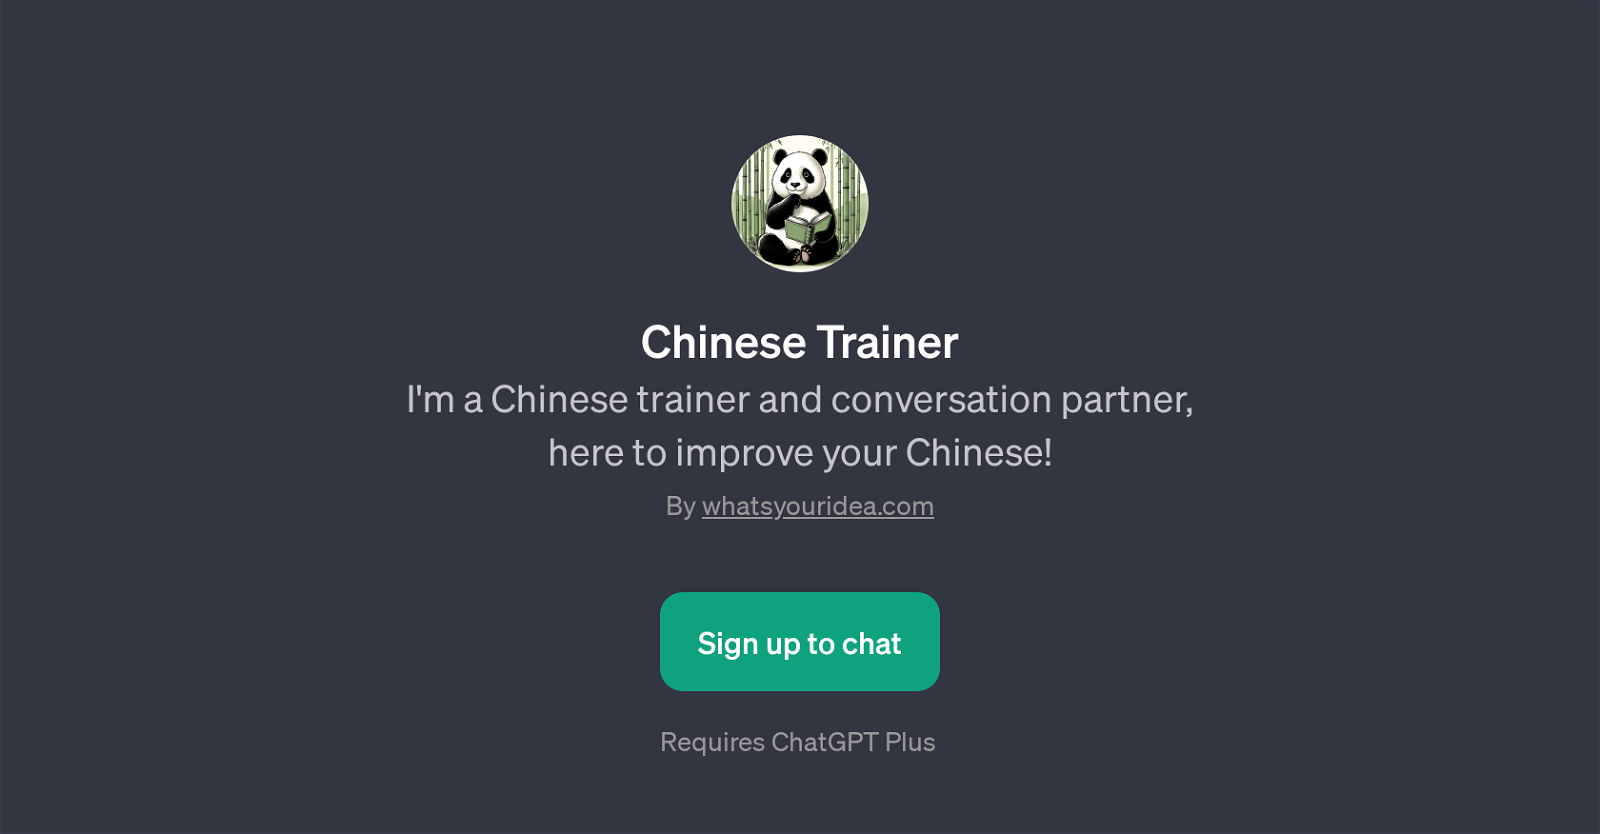 Chinese Trainer website